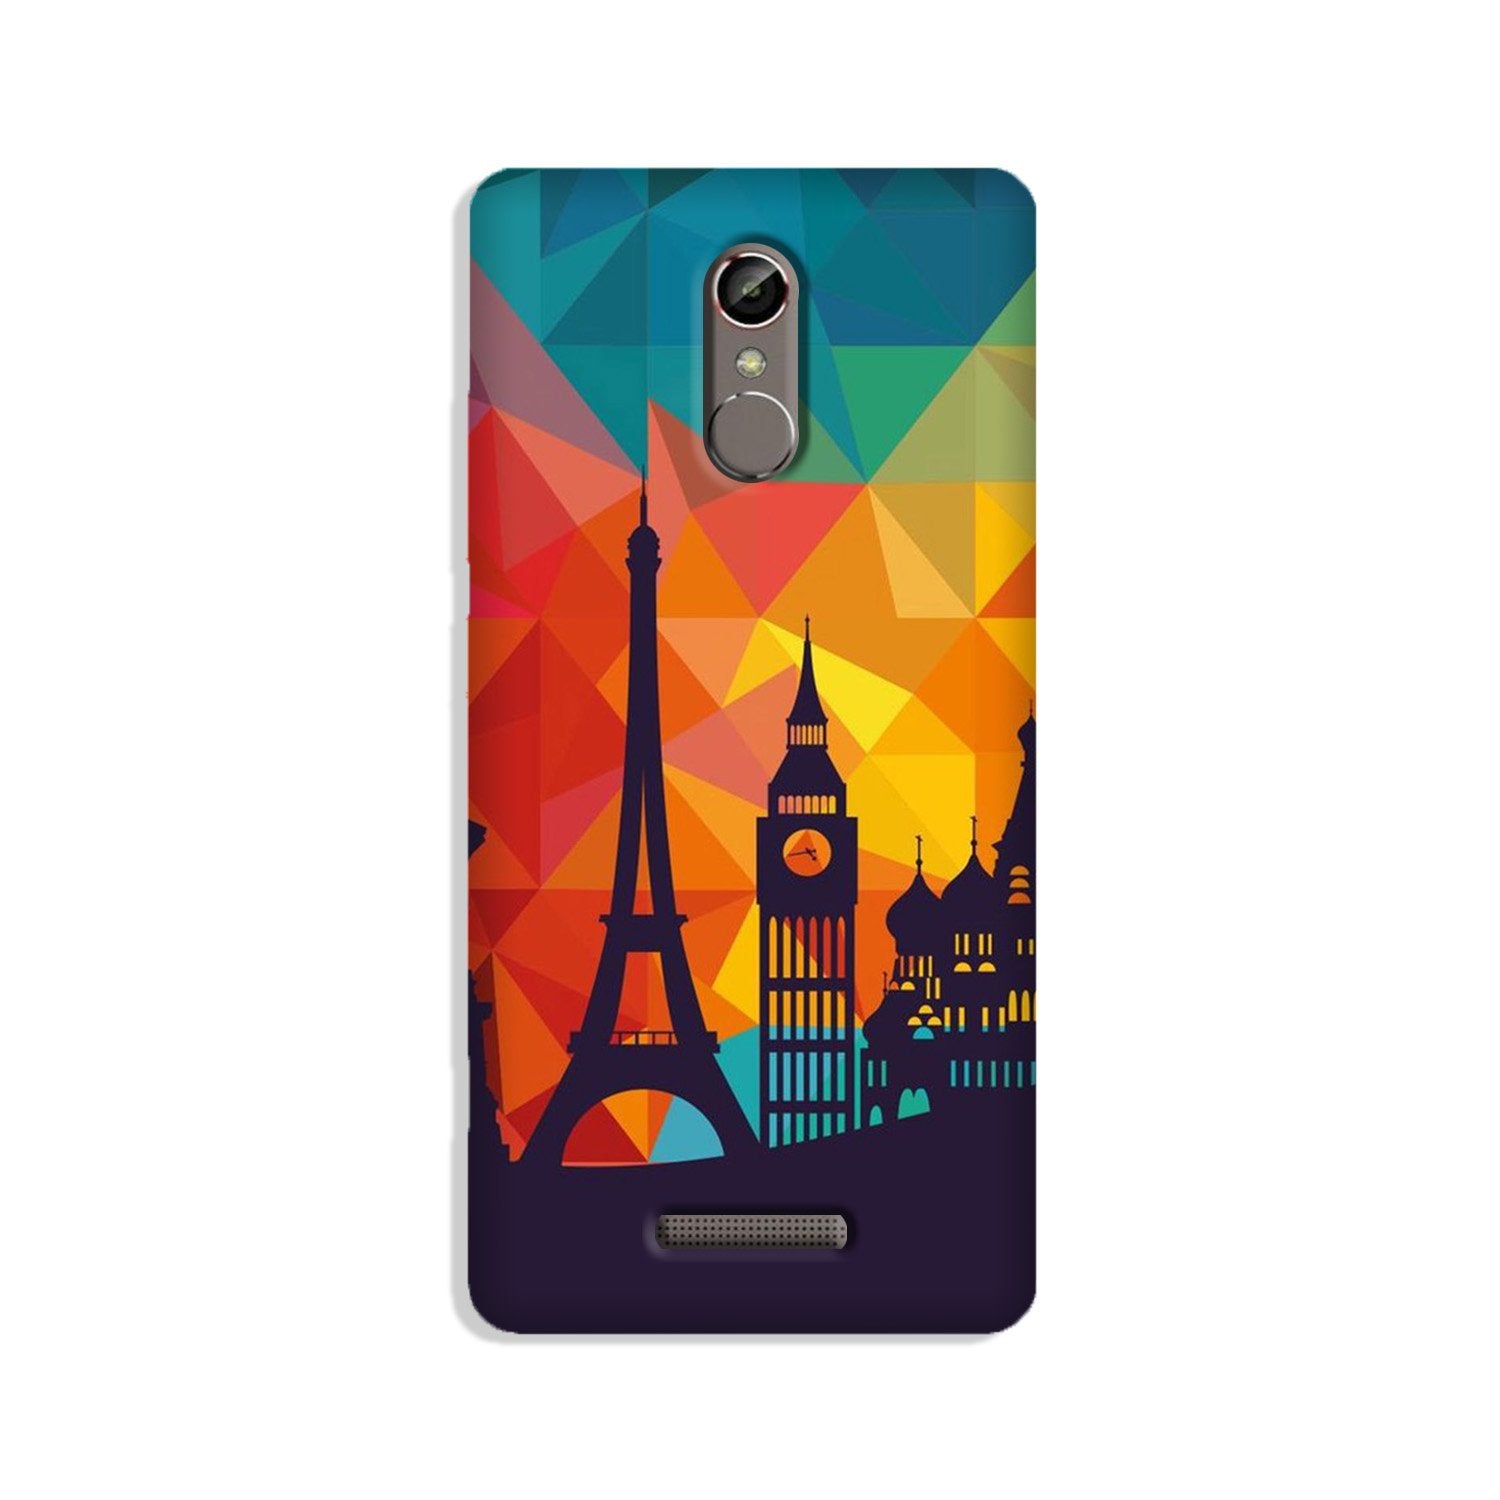 Eiffel Tower Case for Redmi Note 3